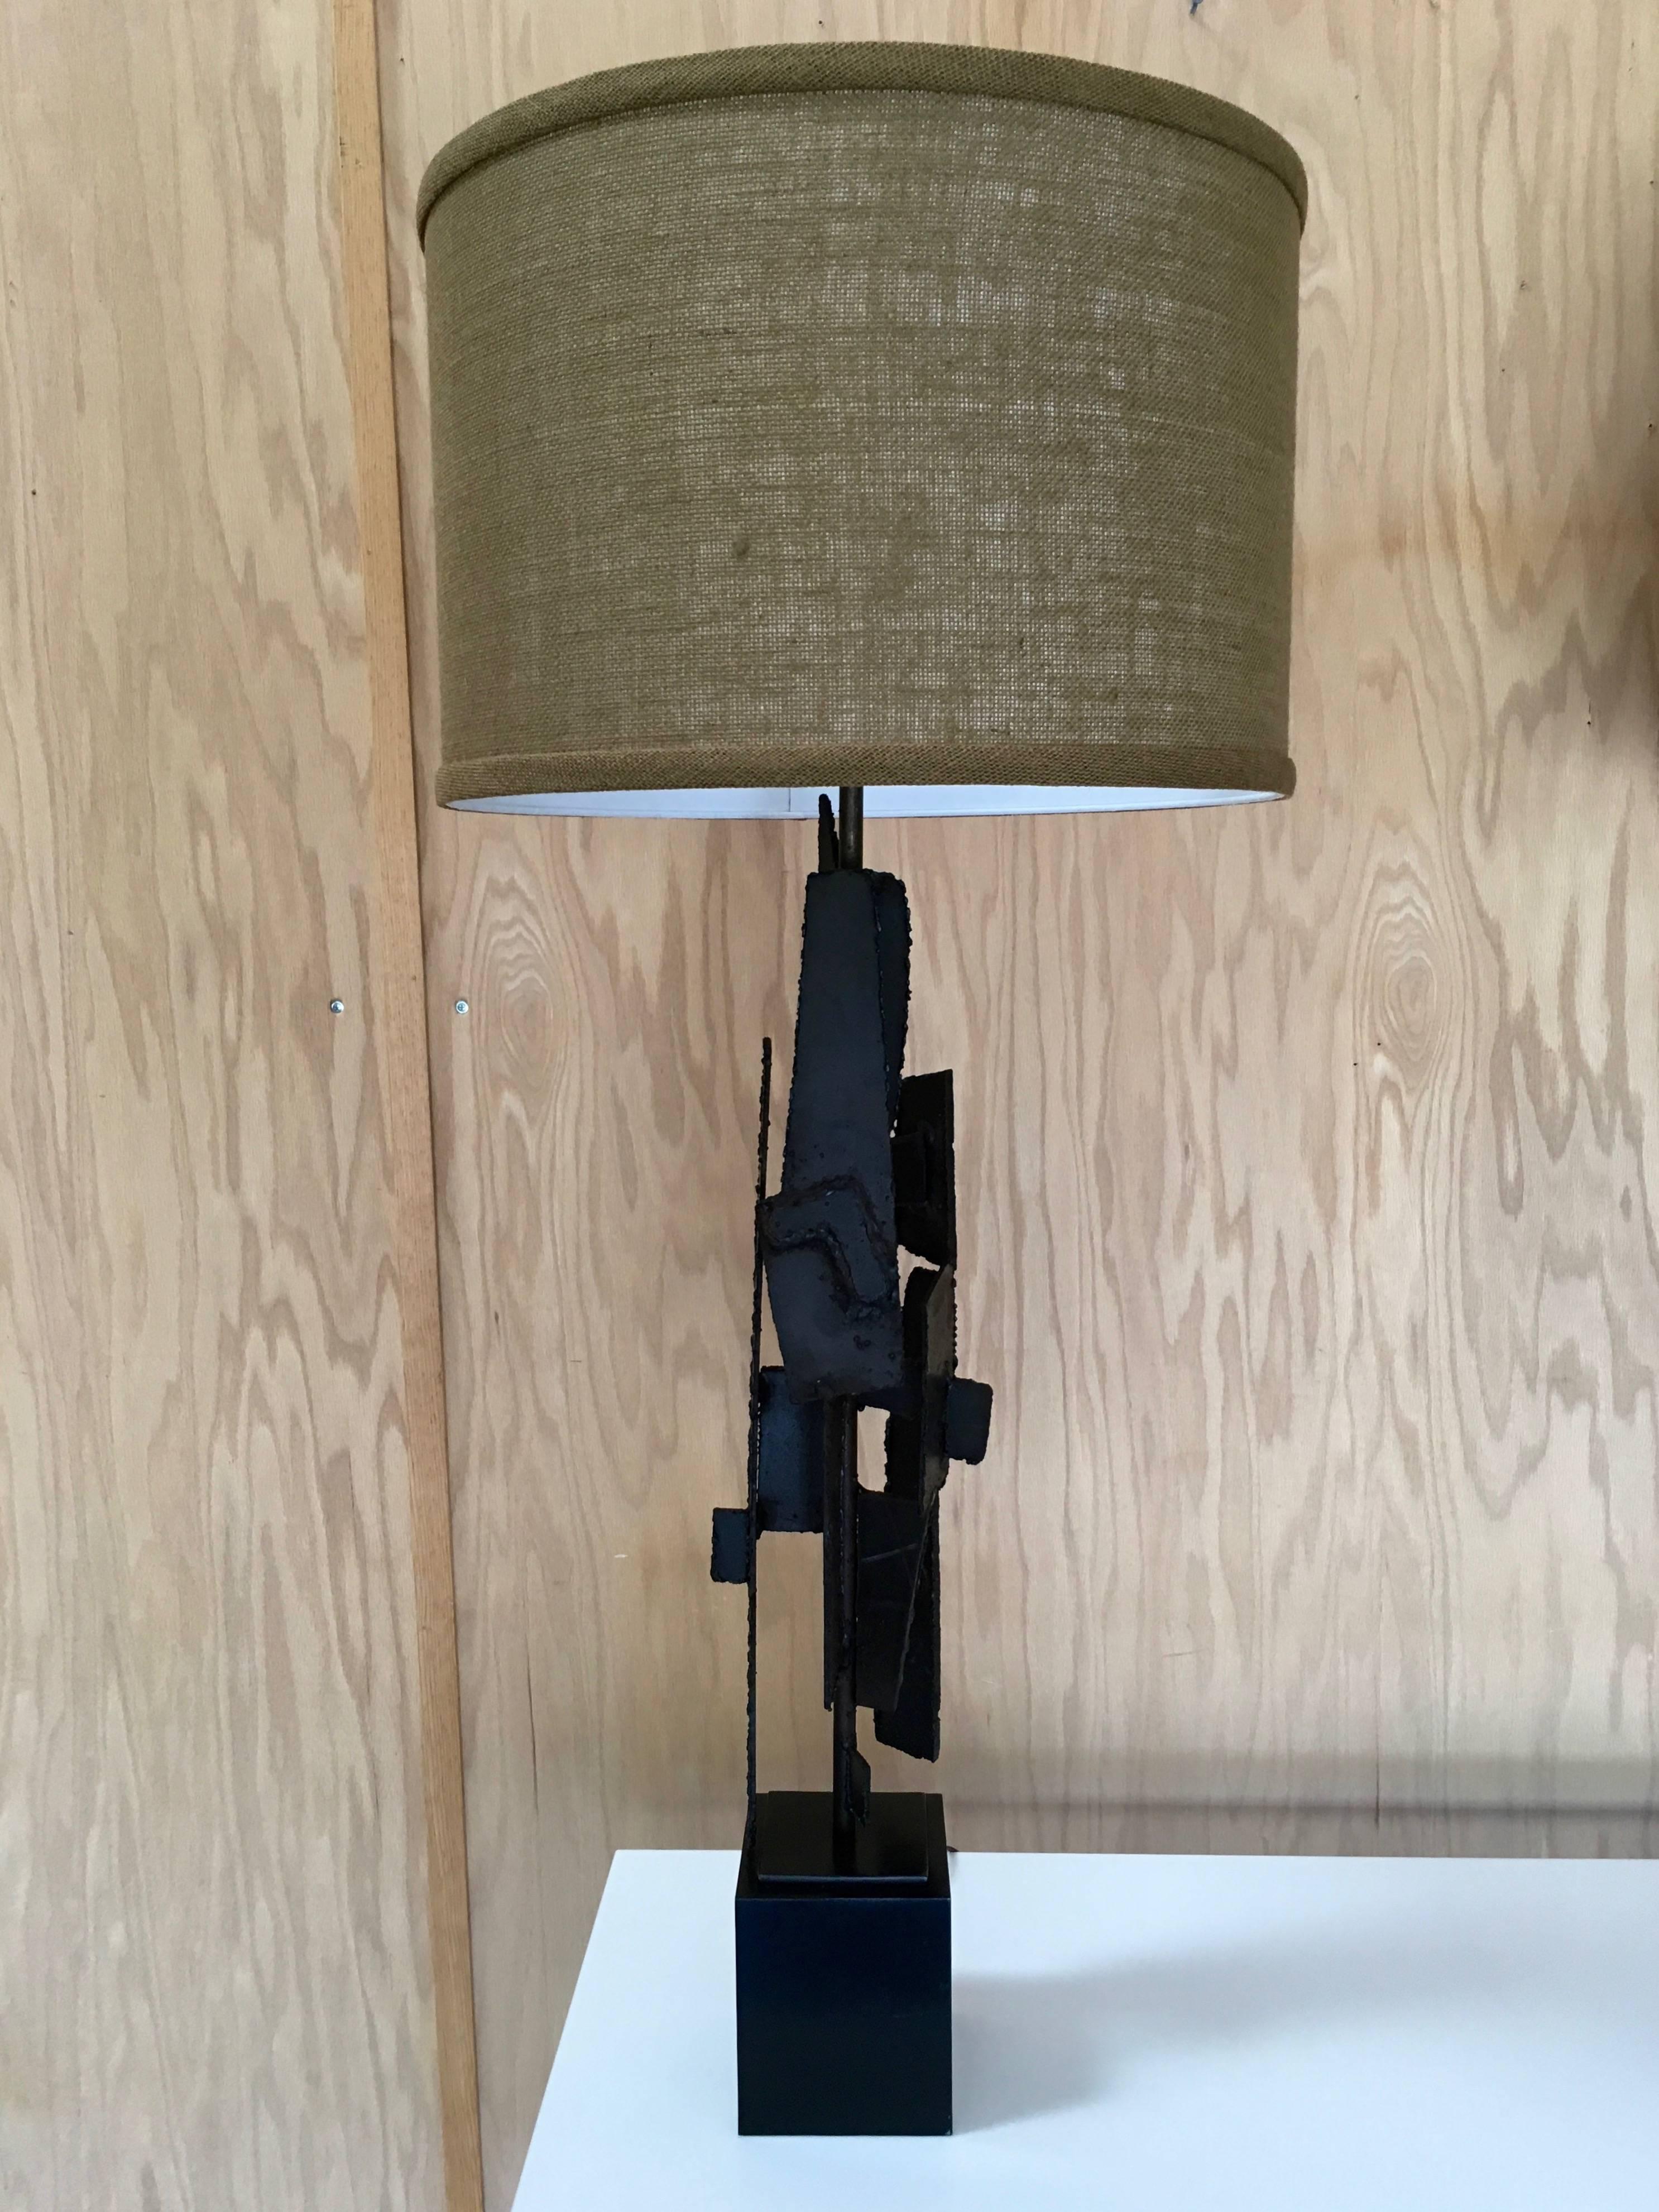 Pair of sculptural brutalist torch cut lamps by Richard Barr for Laurel Lamp Company.